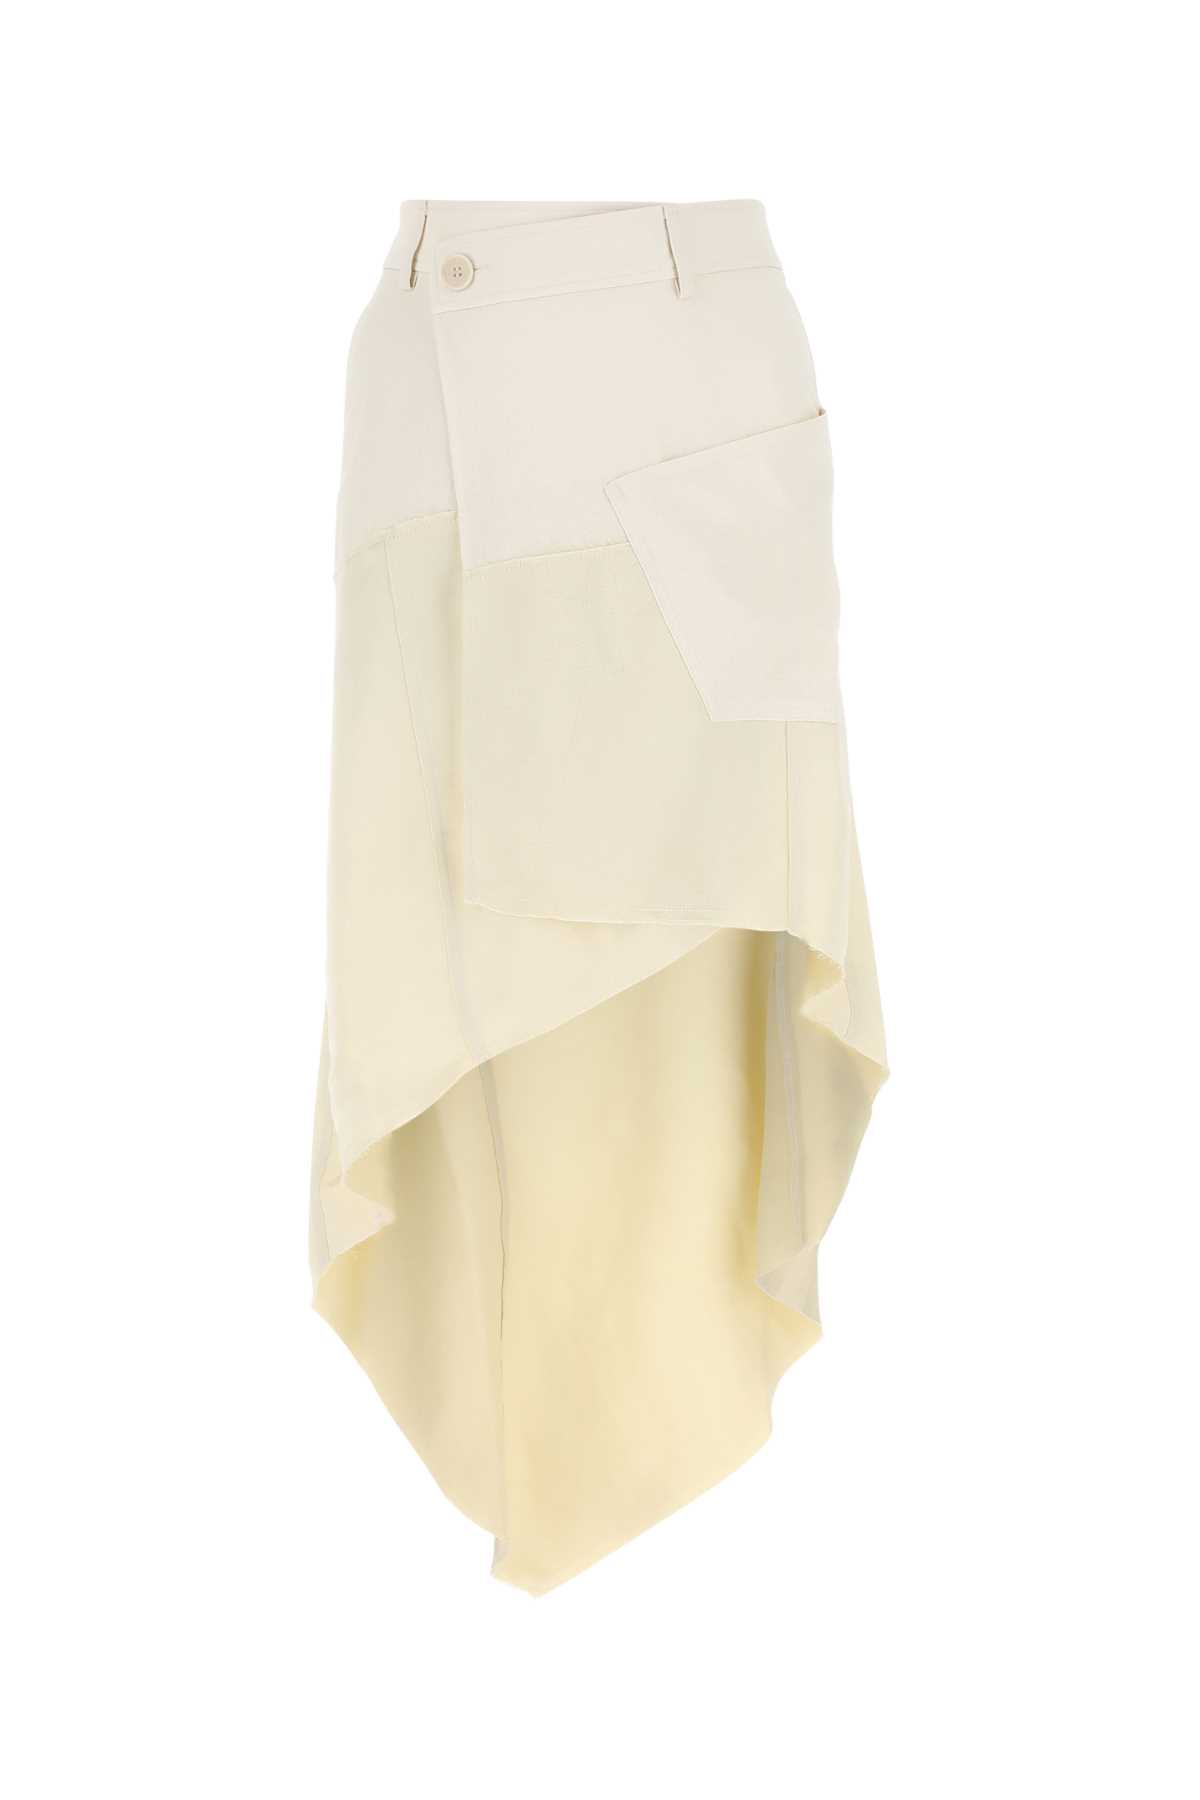 J.W. Anderson Ivory Polyester Skirt